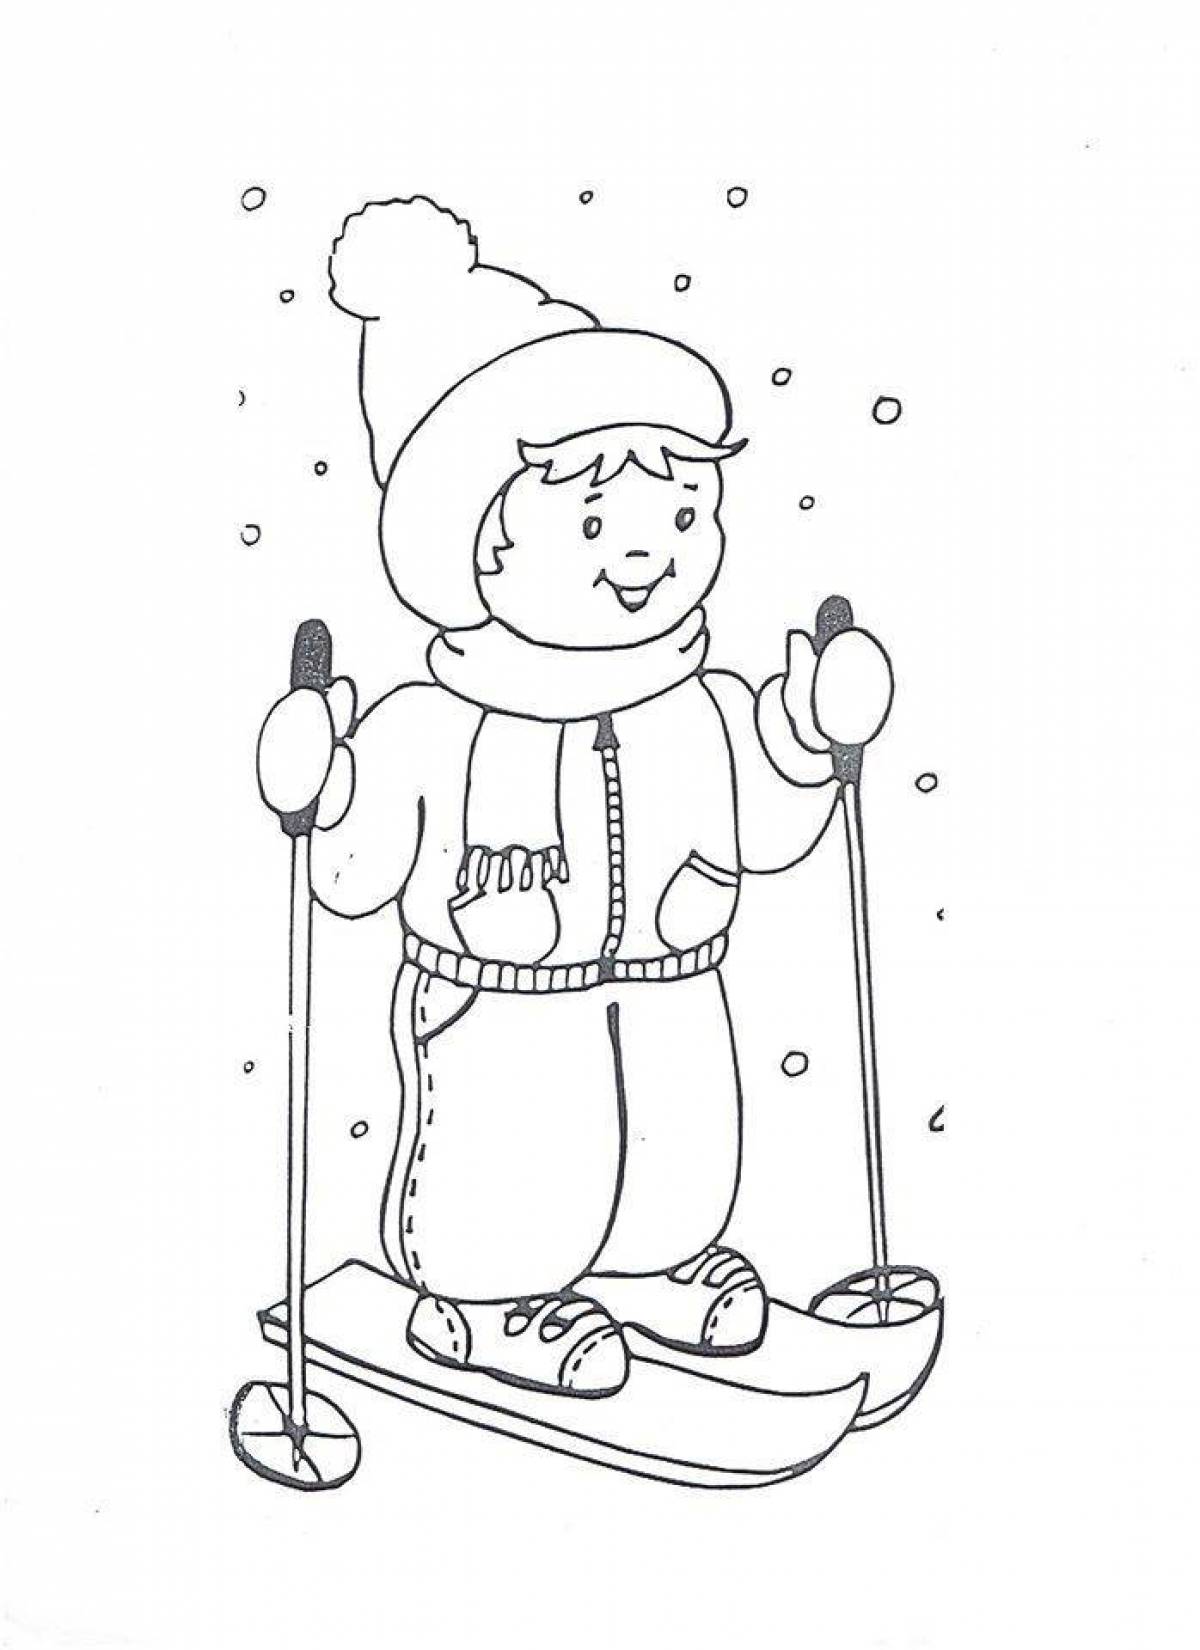 Animated coloring book for children winter fun 5-6 years old